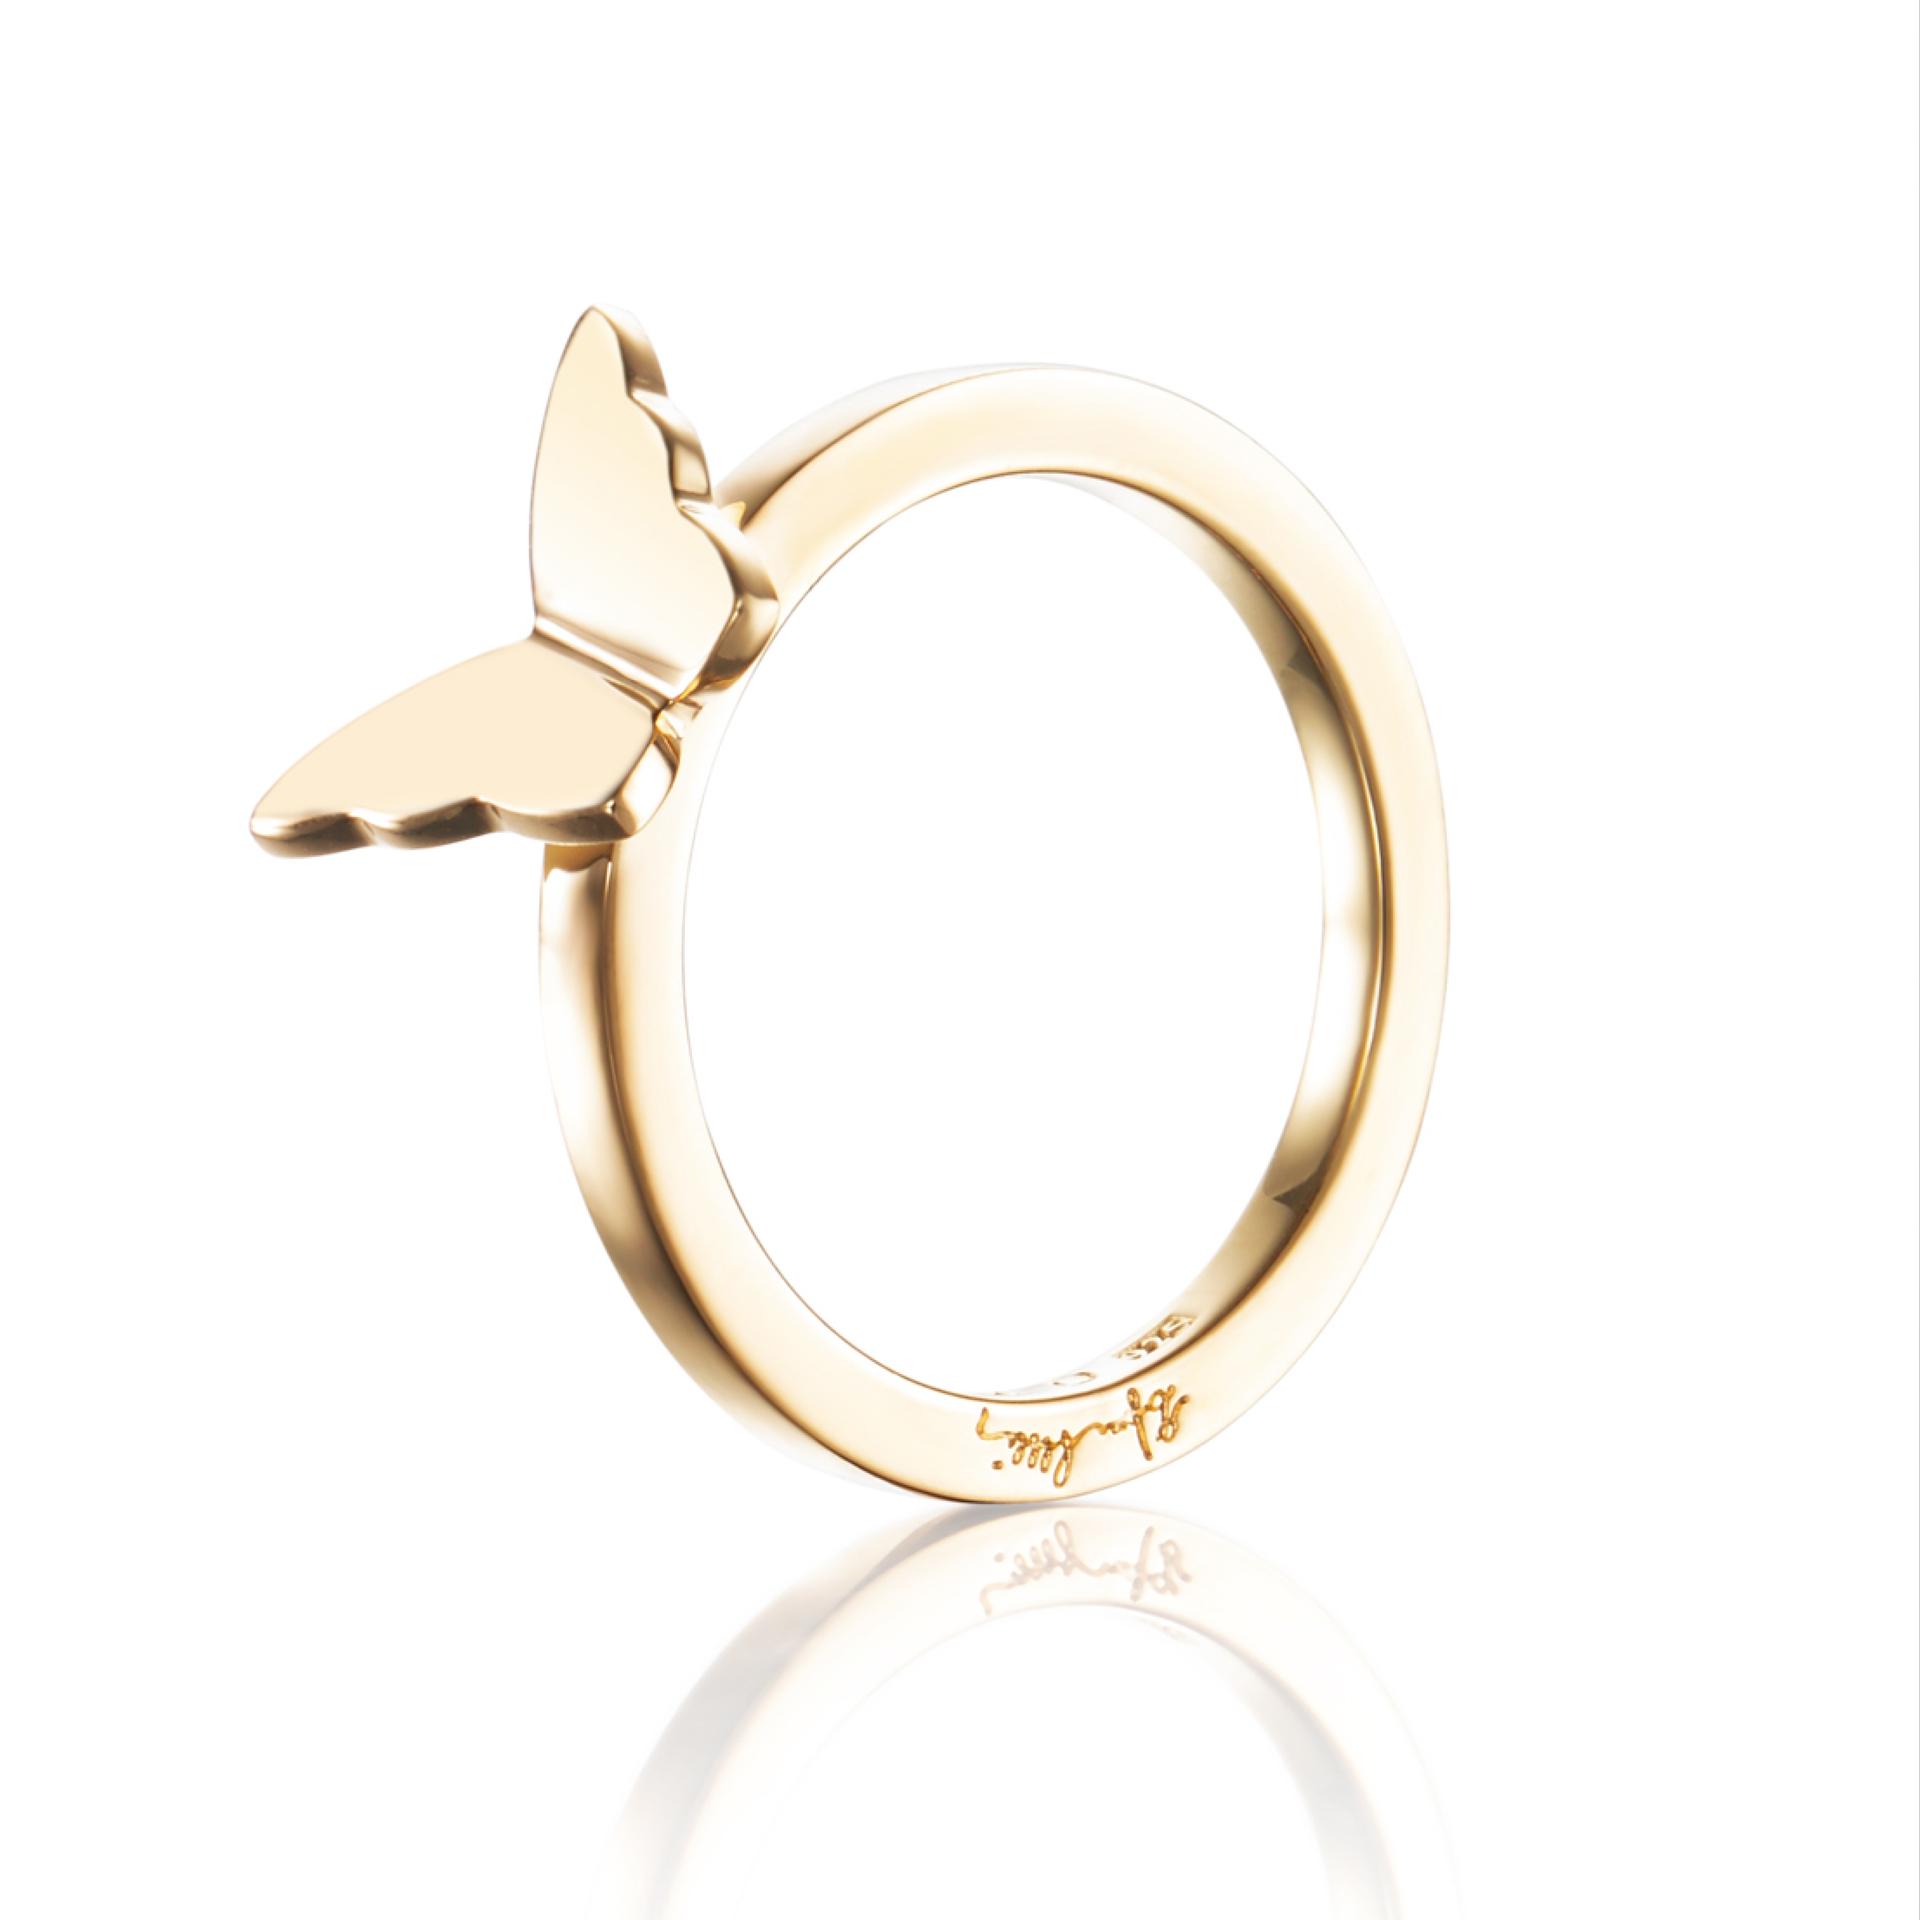 LITTLE MISS BUTTERFLY RING - GOLD.